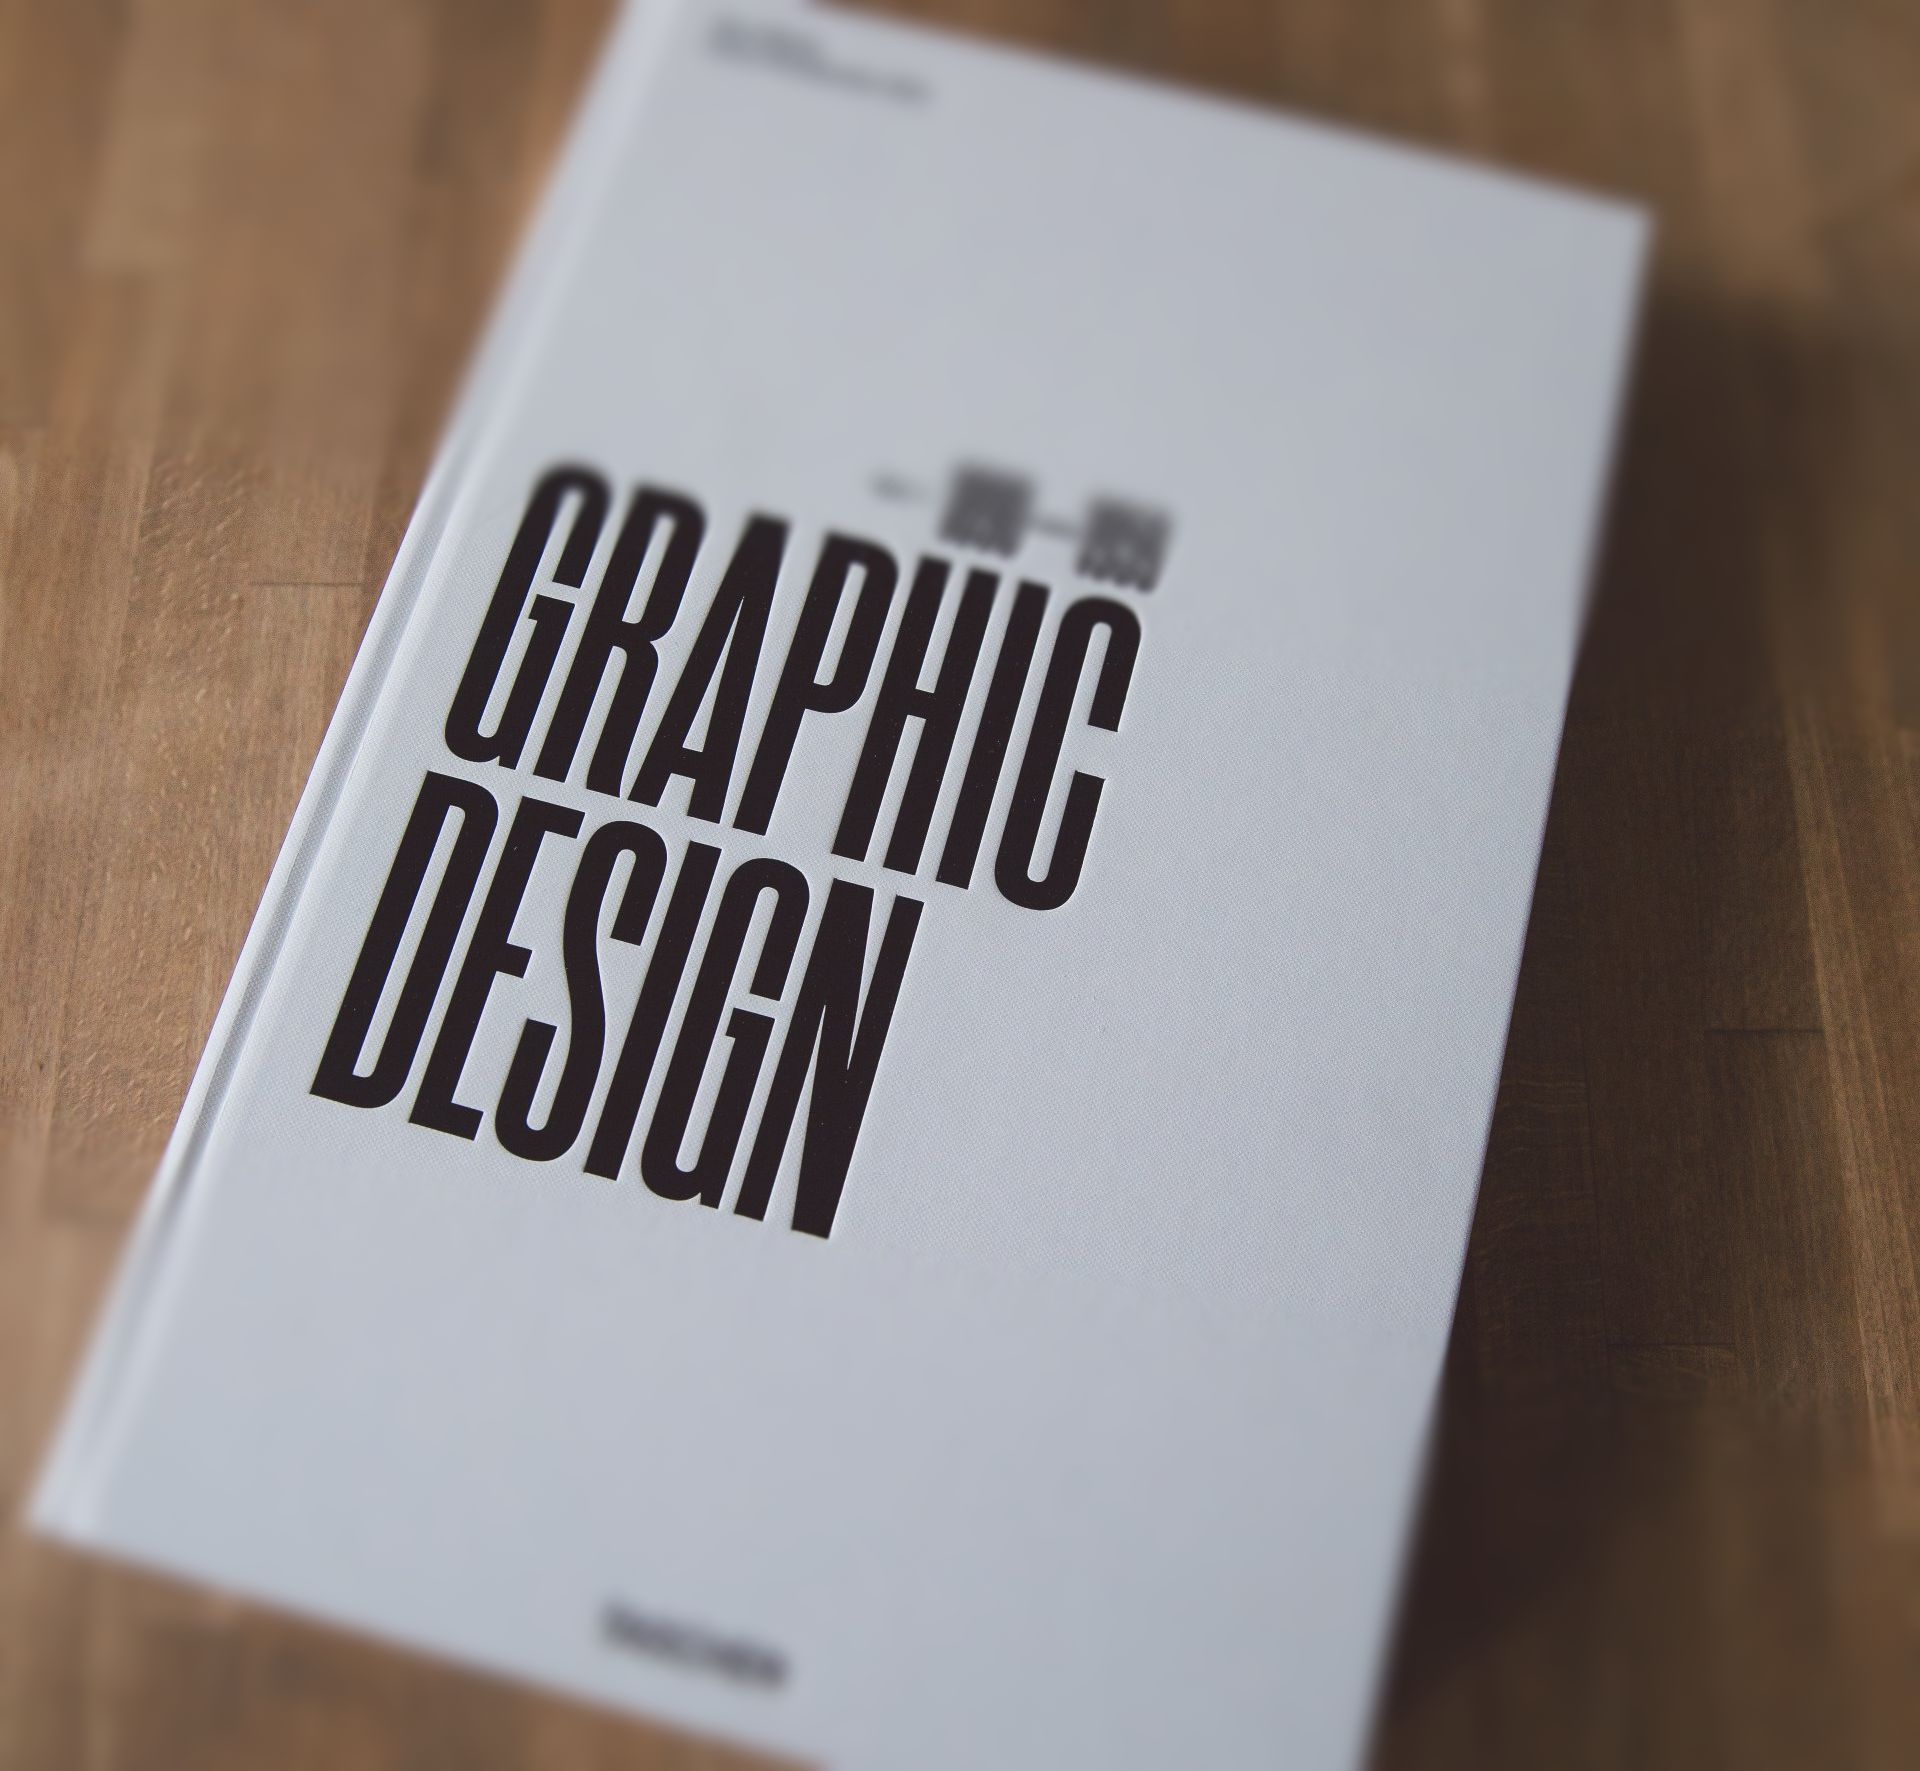 A book titled graphic design sits on a wooden table